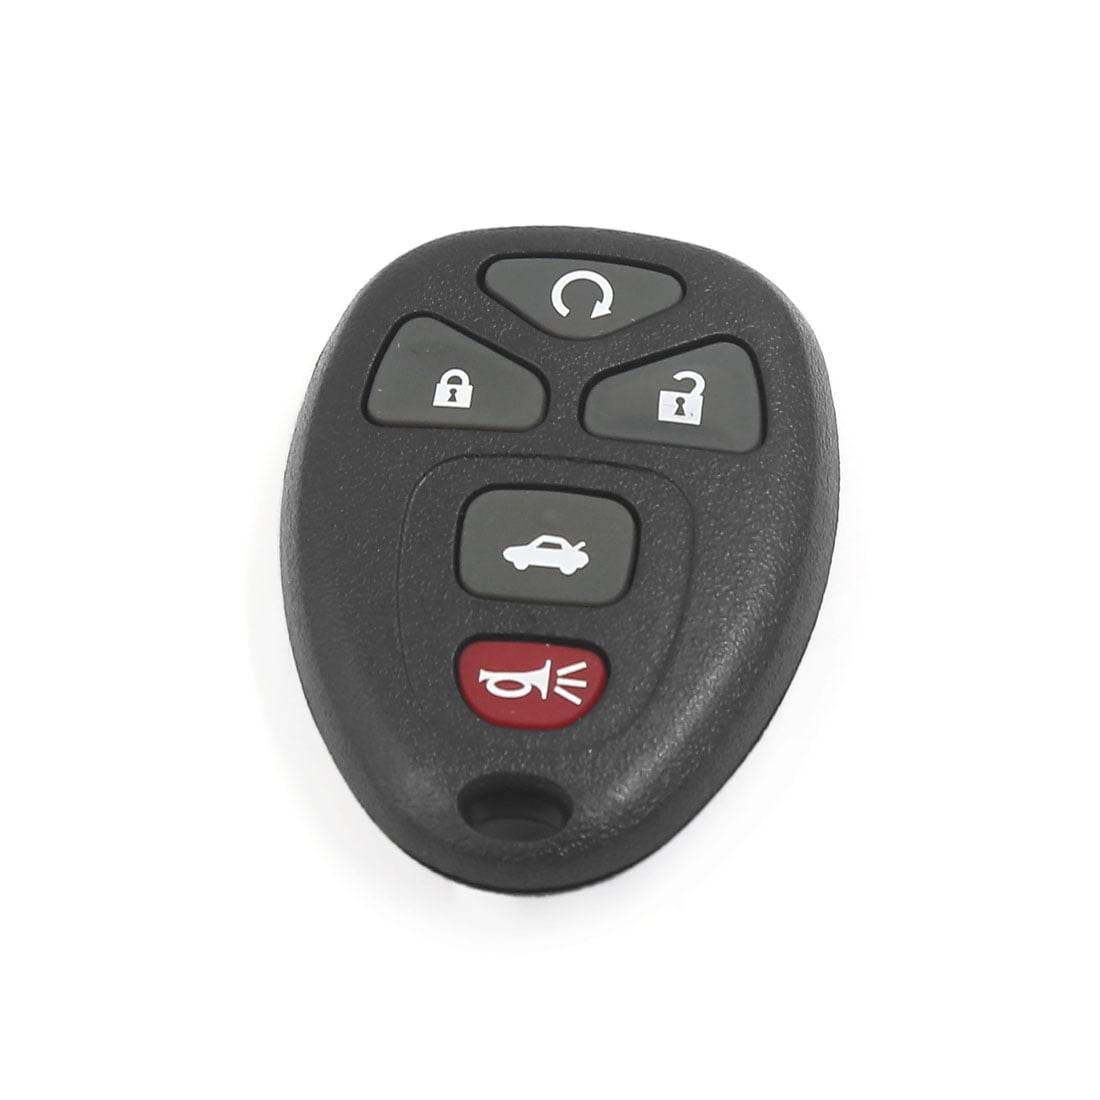 1x New Replacement Keyless Entry Remote Control Key Fob For GM Chevy 22733524